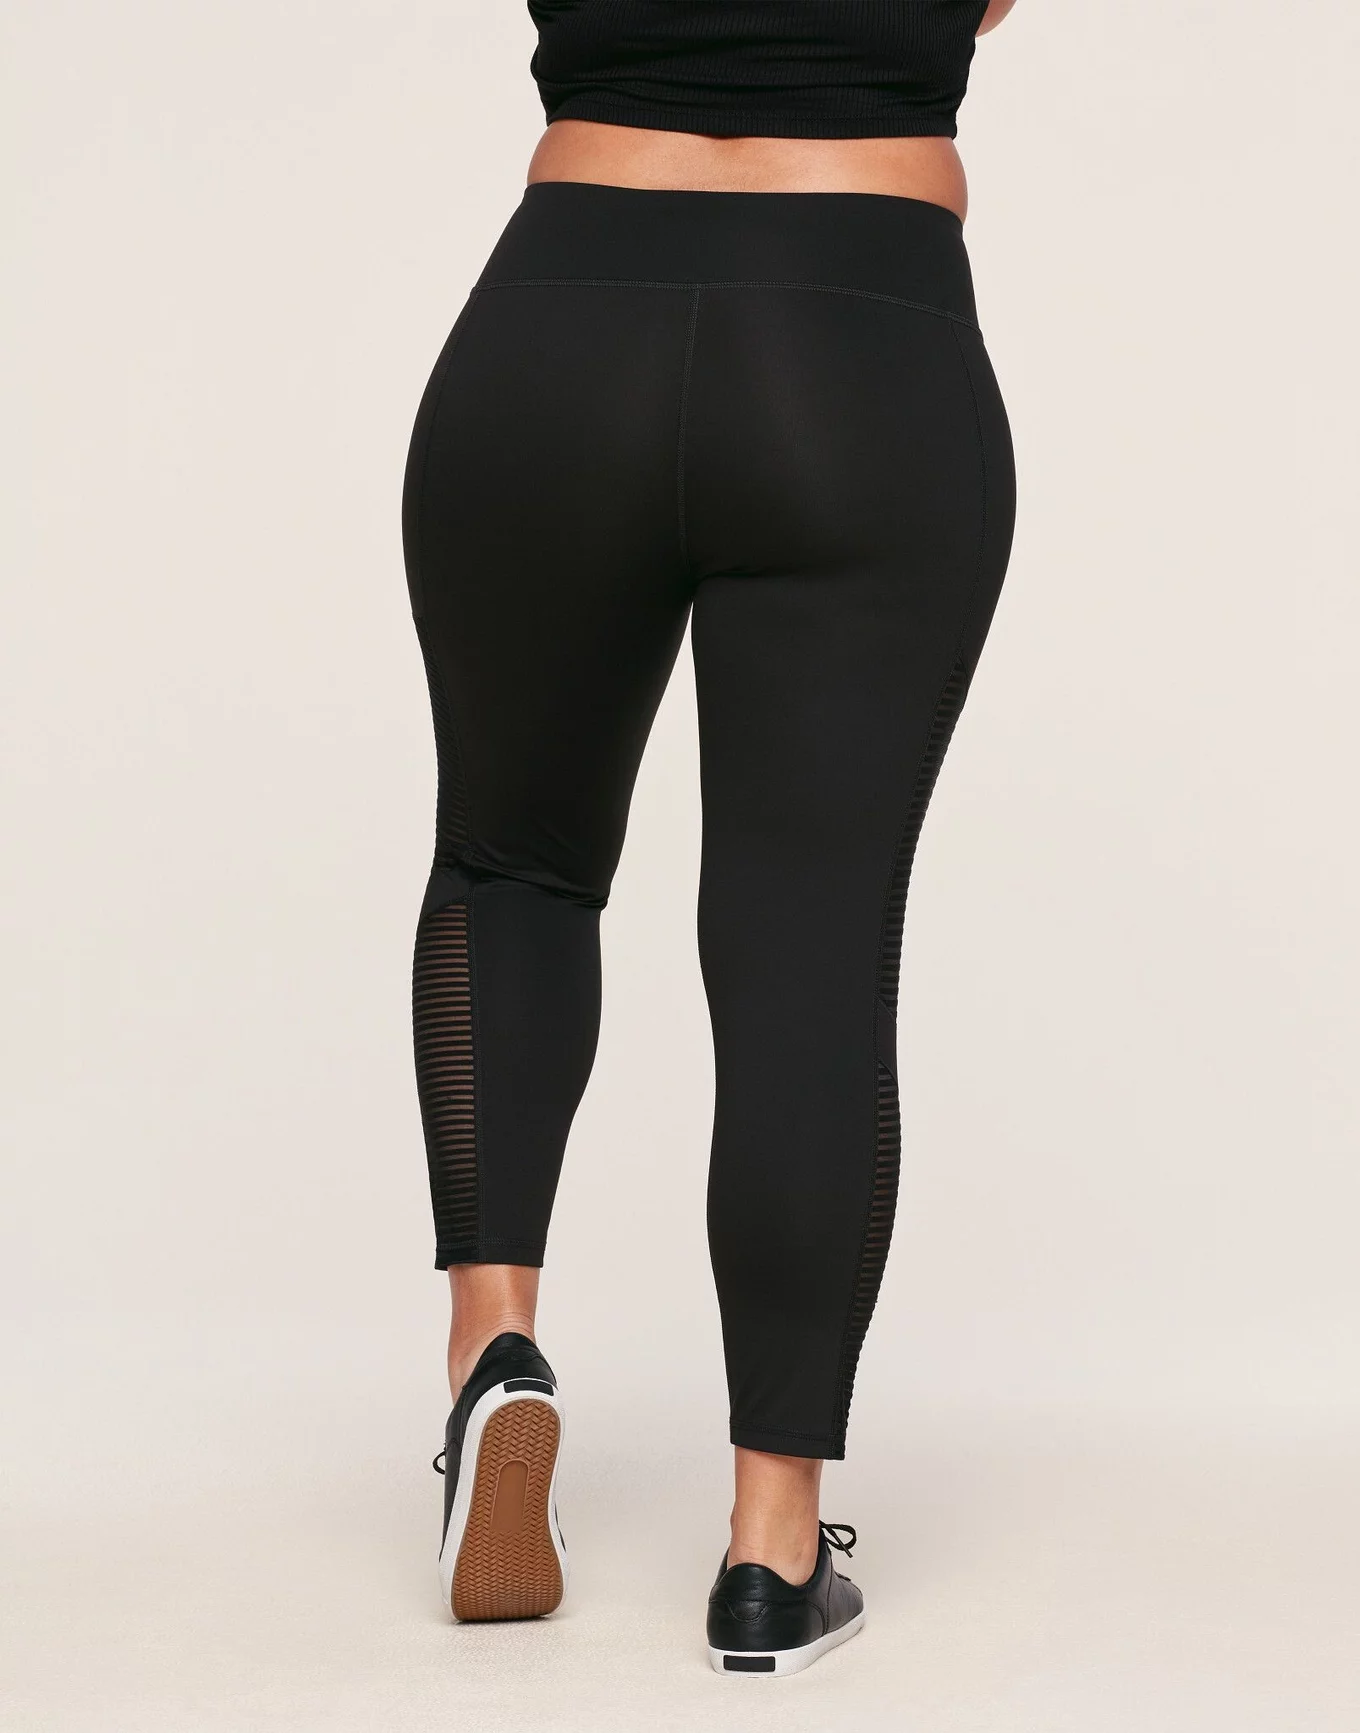 Fabletics Women's High-Waisted Seamless Mesh Legging, Workout, Yoga,  Seamless, XS, Black at  Women's Clothing store